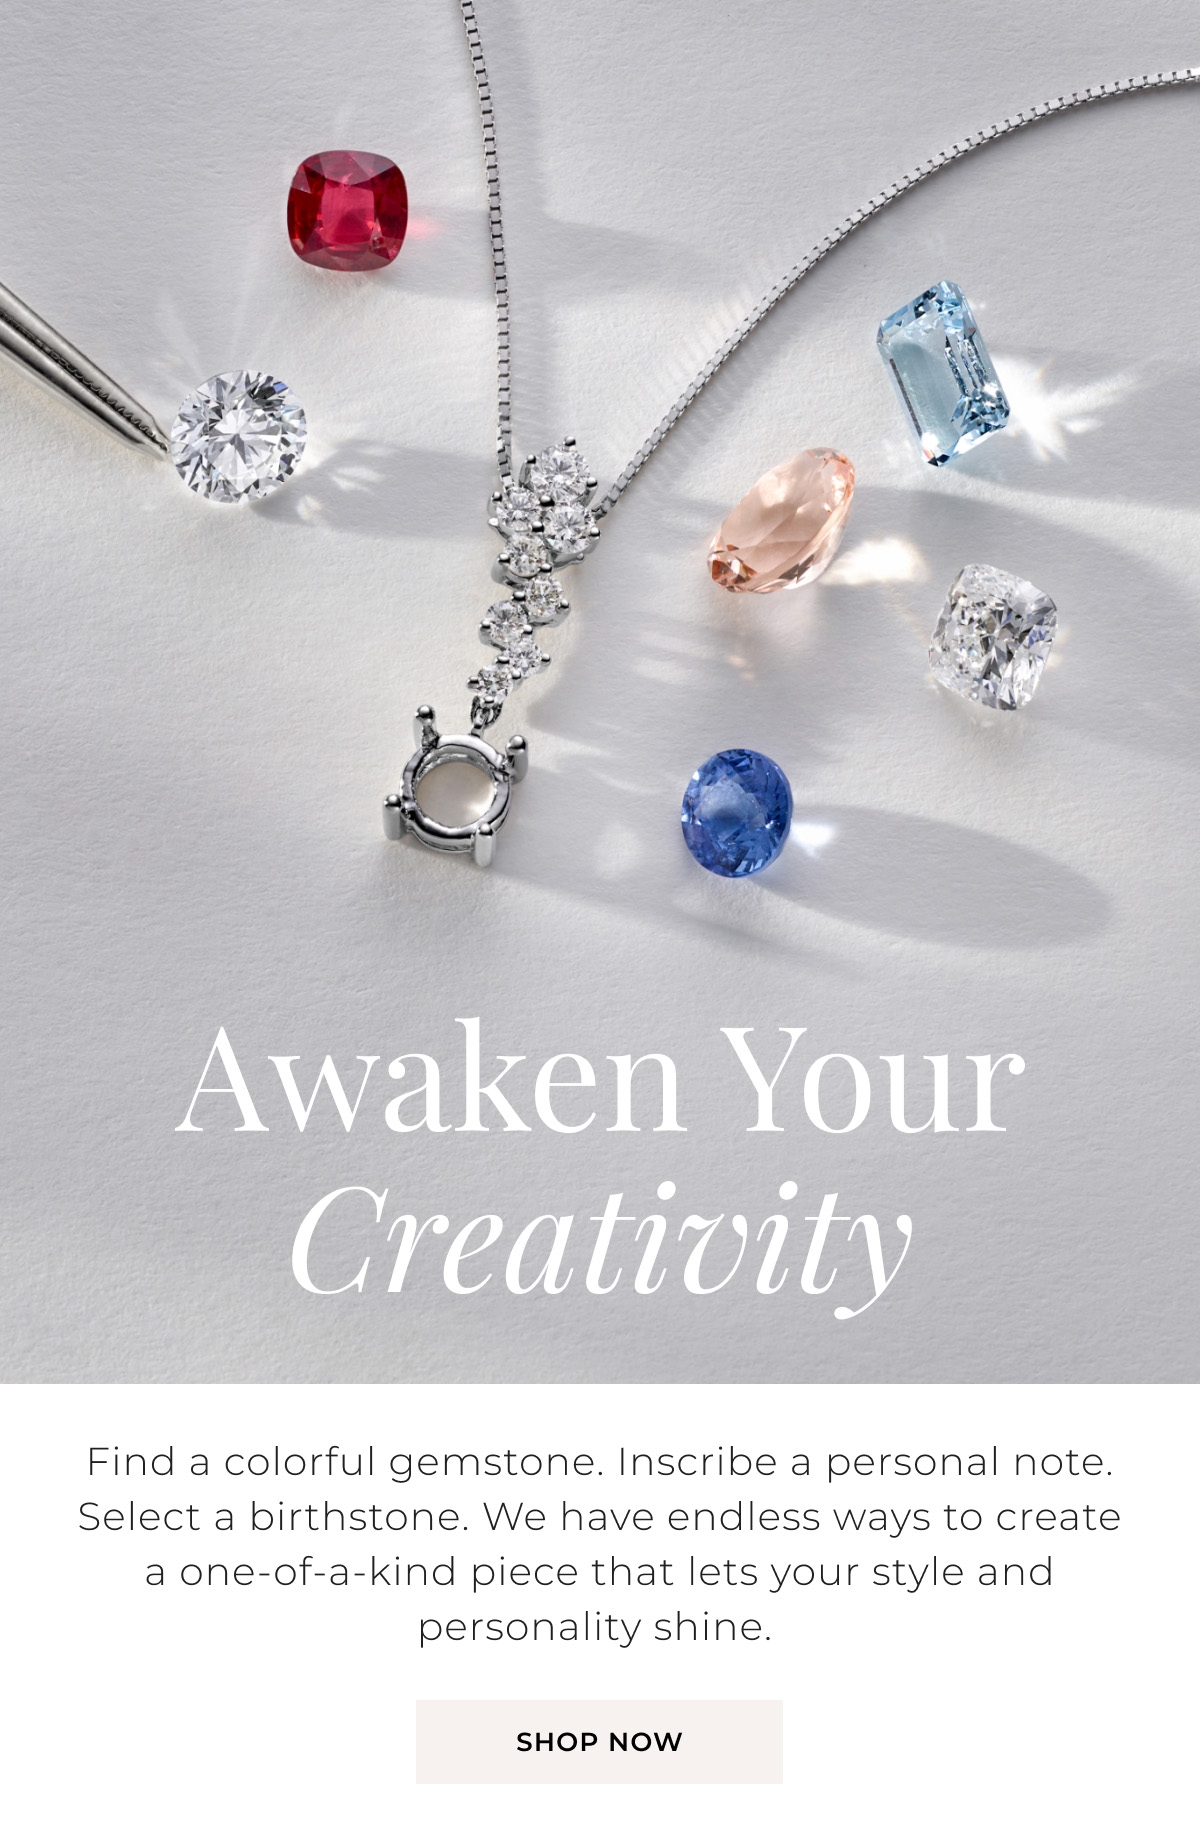 Awaken Your Creativity - Find a colorful gemstone. Inscribe a personal note. Select a birthstone. We have endless ways to create a one-of-a-kind piece that lets your style and personality shine. Shop Now >